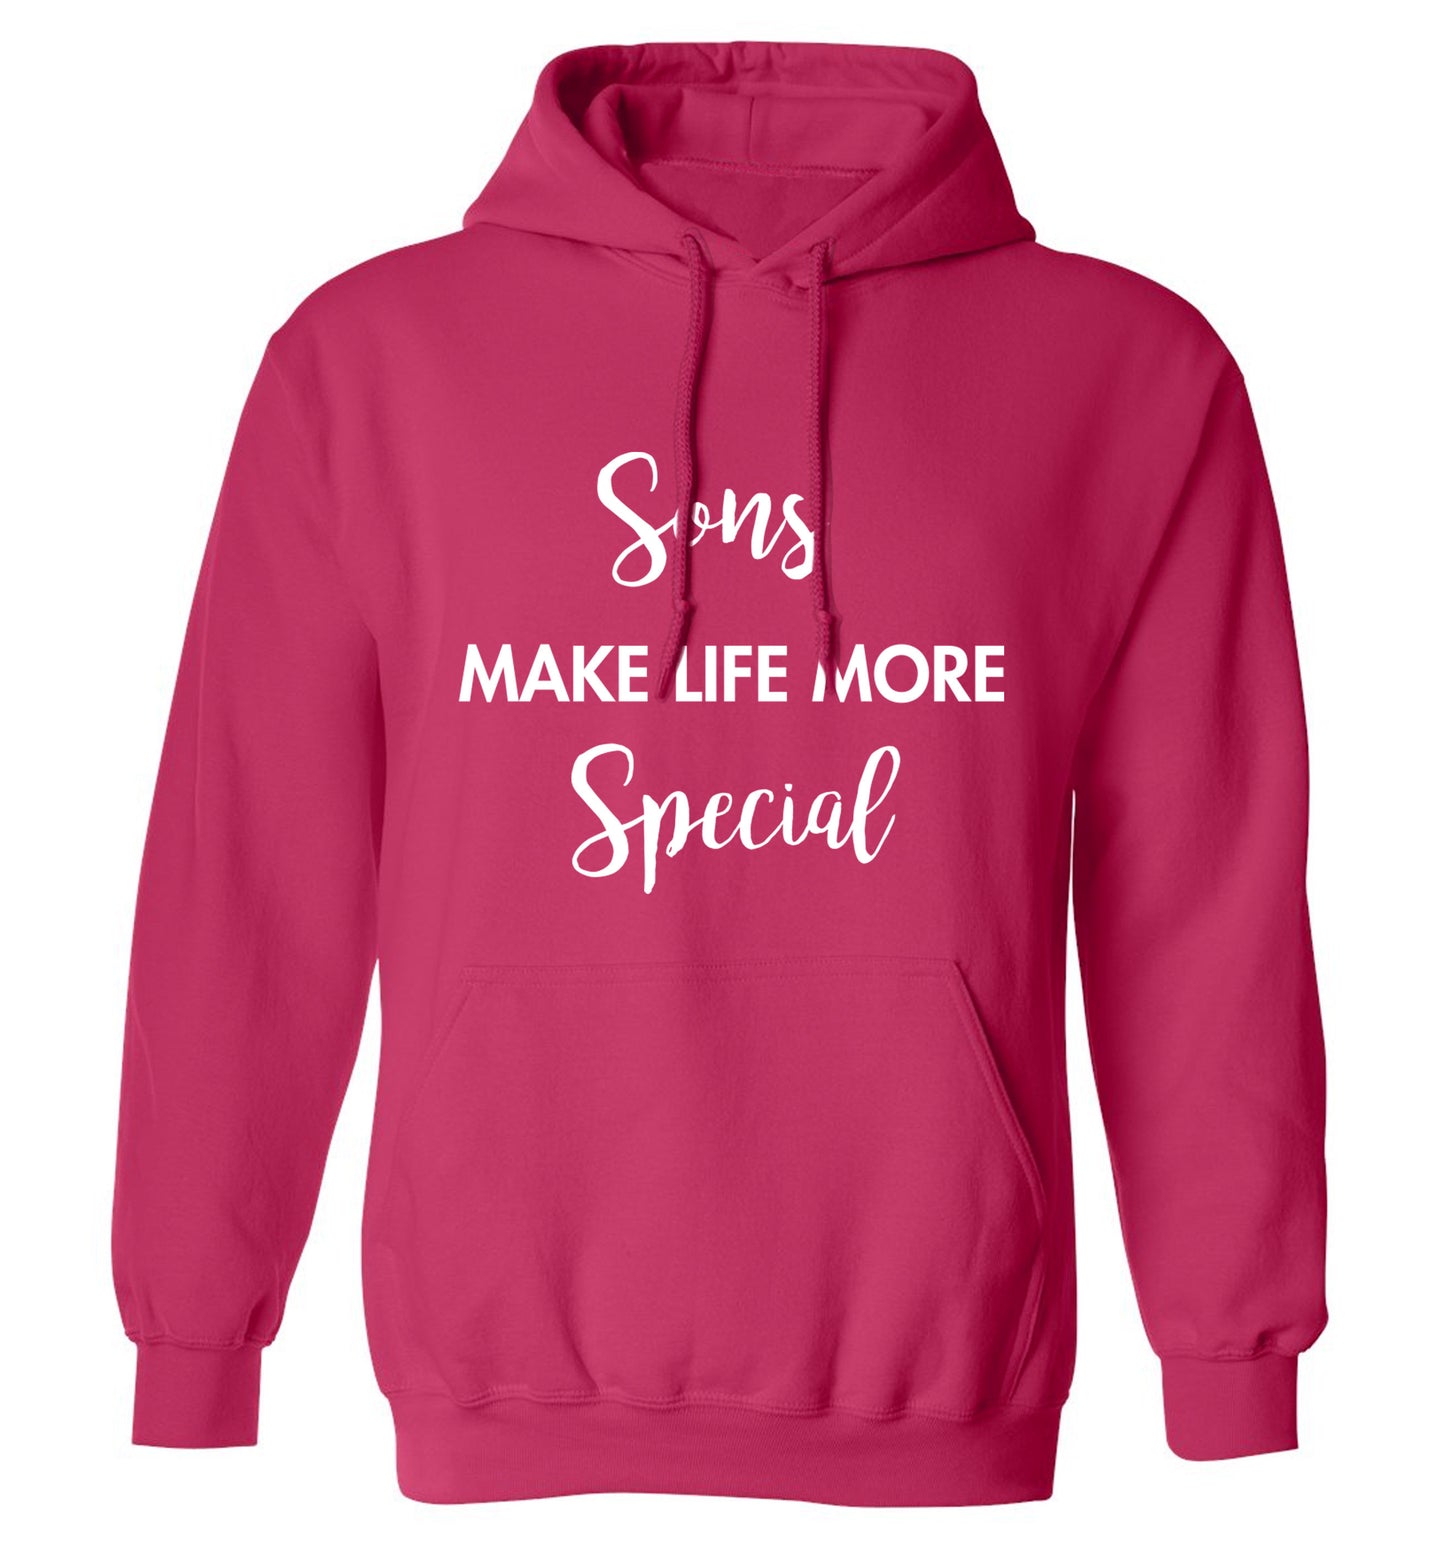 Daughters make life more special adults unisex pink hoodie 2XL